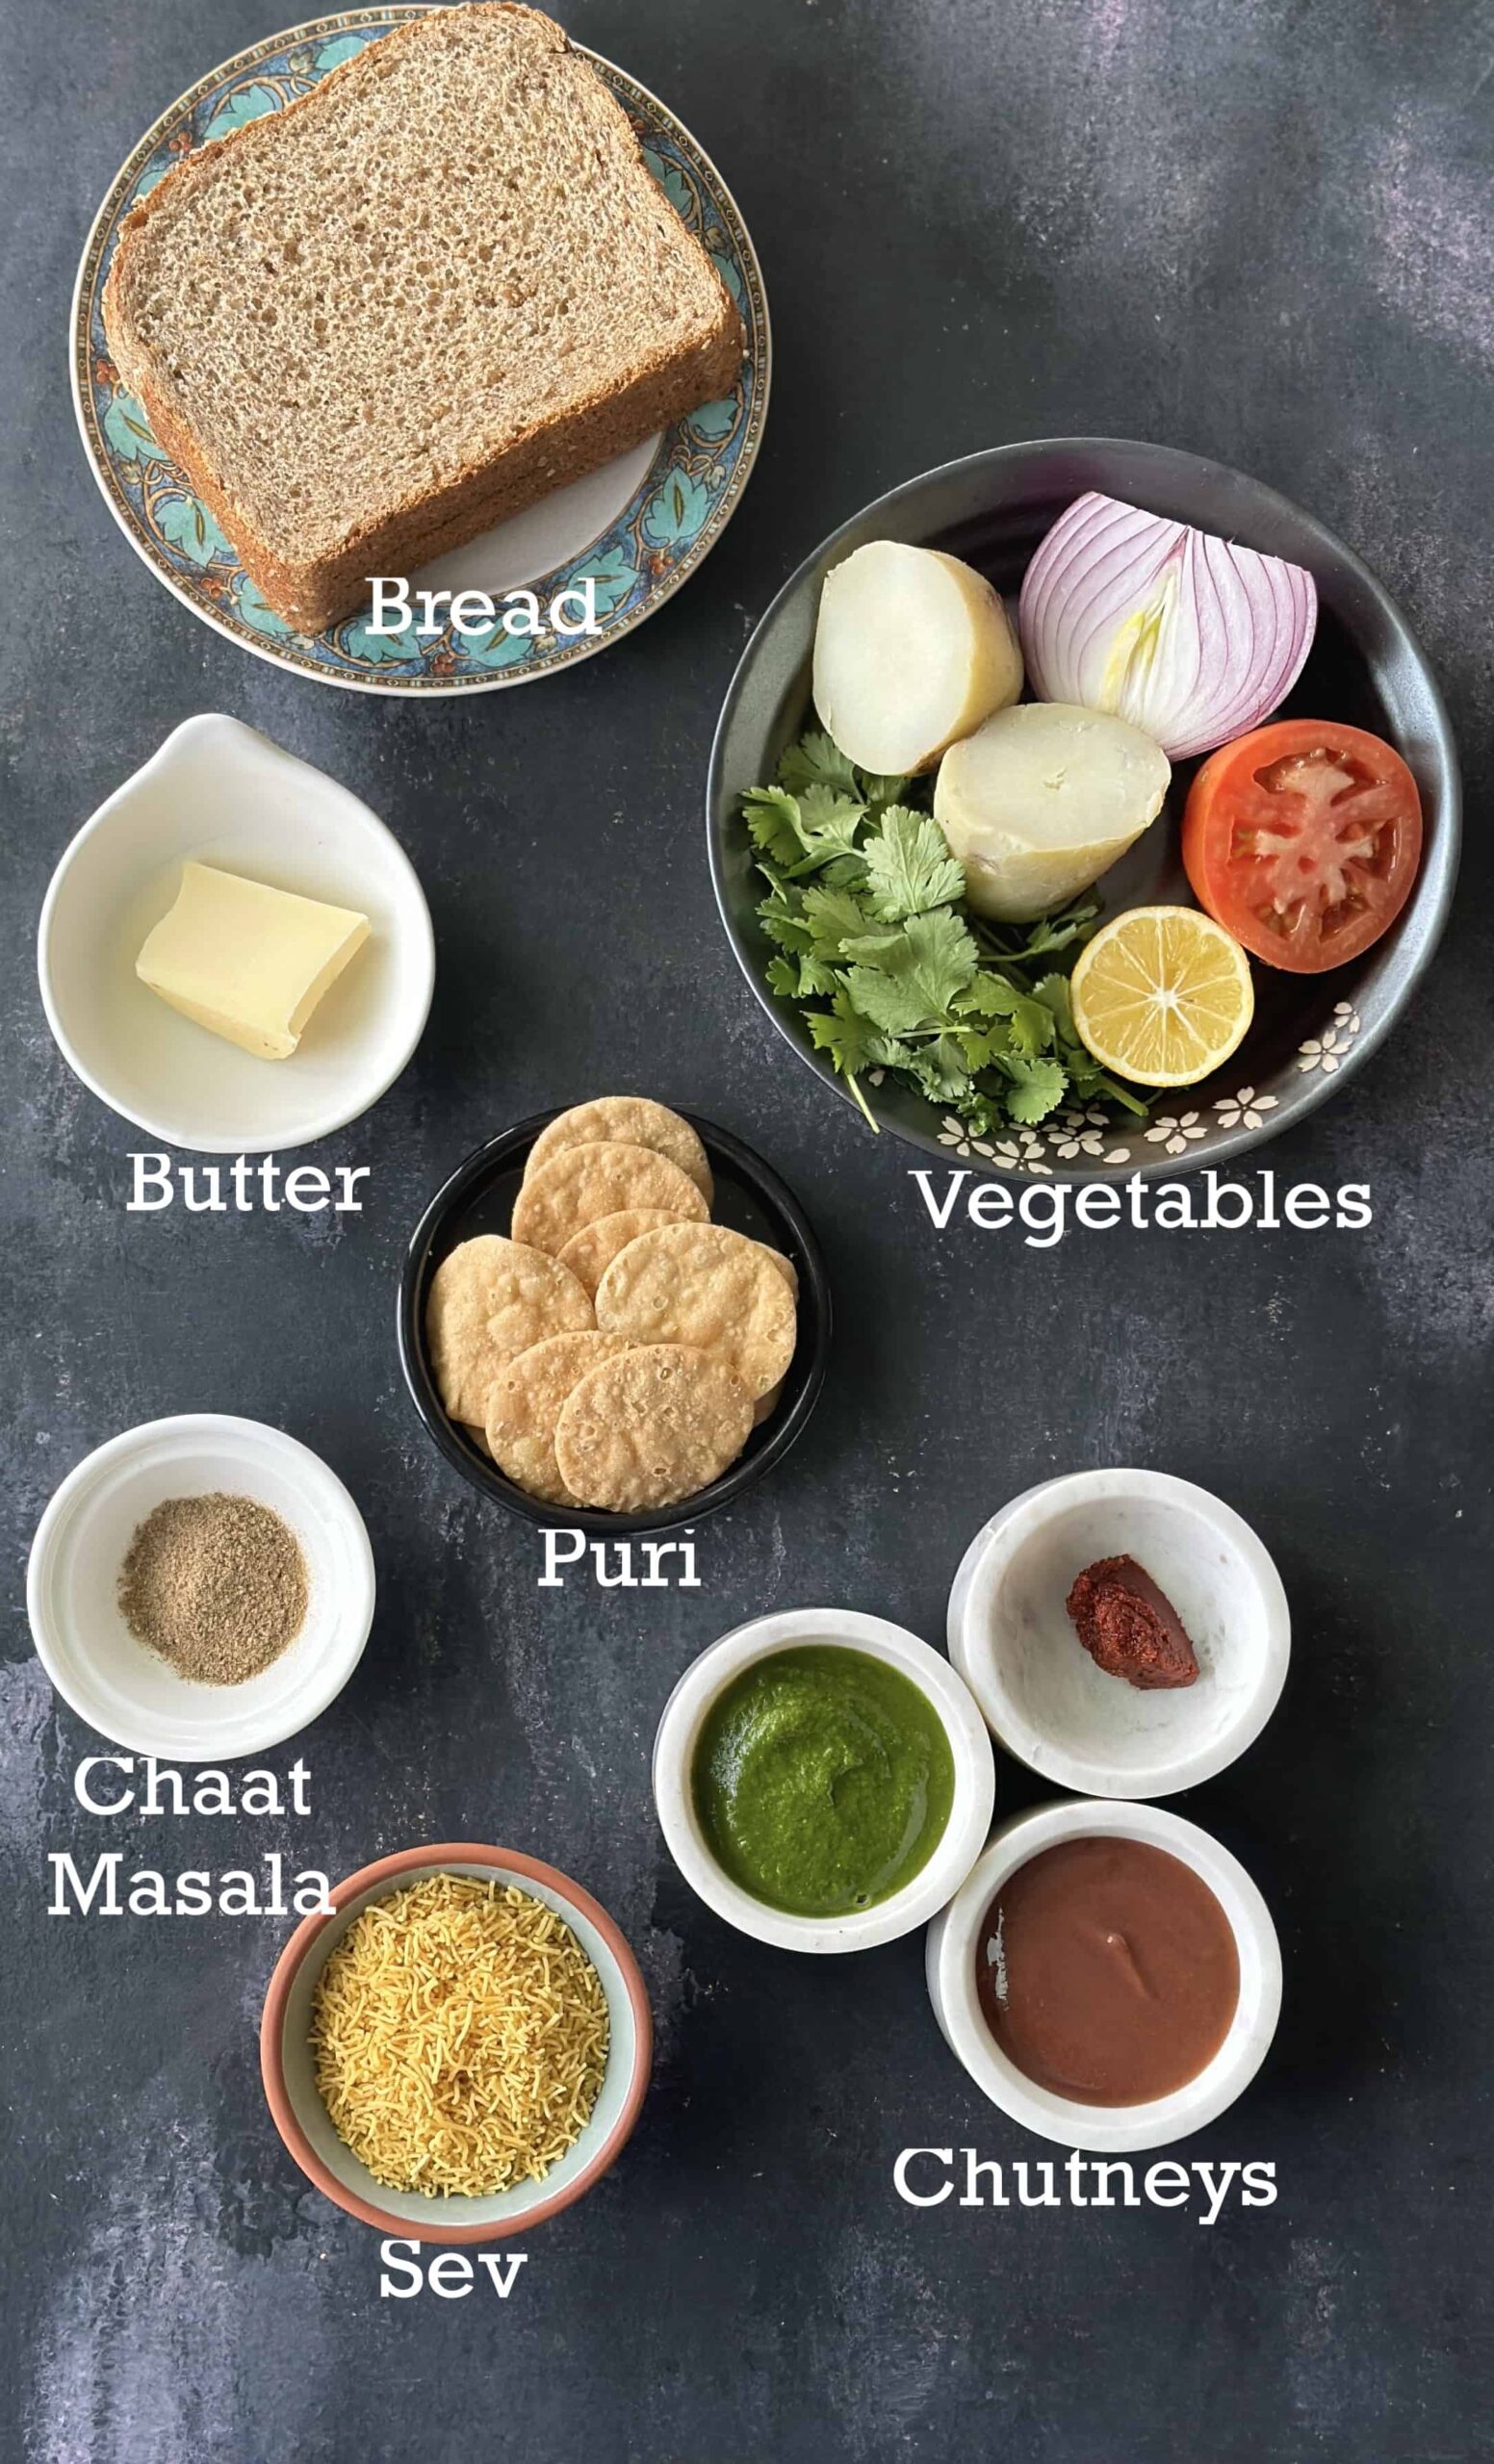 The ingredients needed for sev puri sandwich.